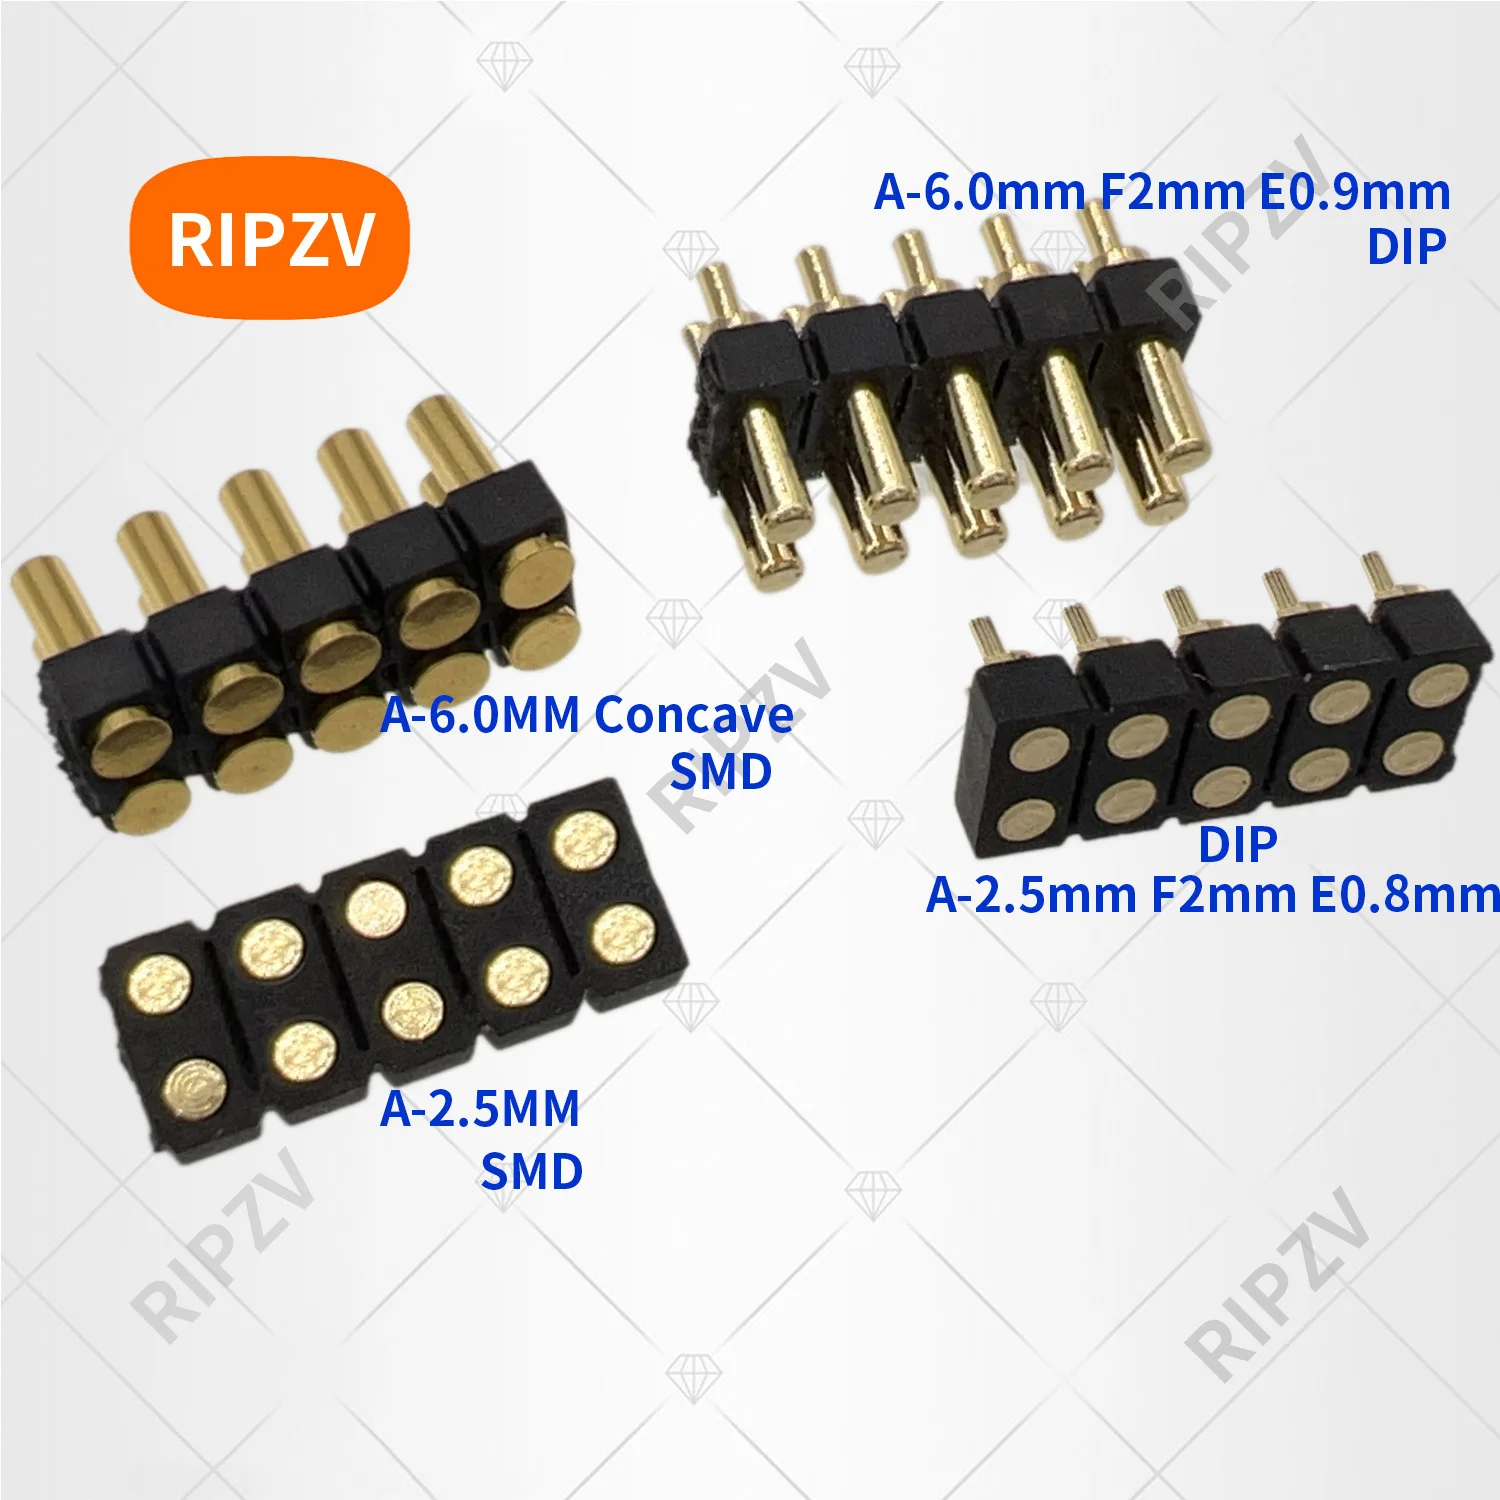 Contact PAD 2.54 Grid Pitch 4 6 8 10 12 14 16 18 20 Pin Female Socket Connector Spring Pogo Header DIP Dual Row RIPZV 0.1in SMD